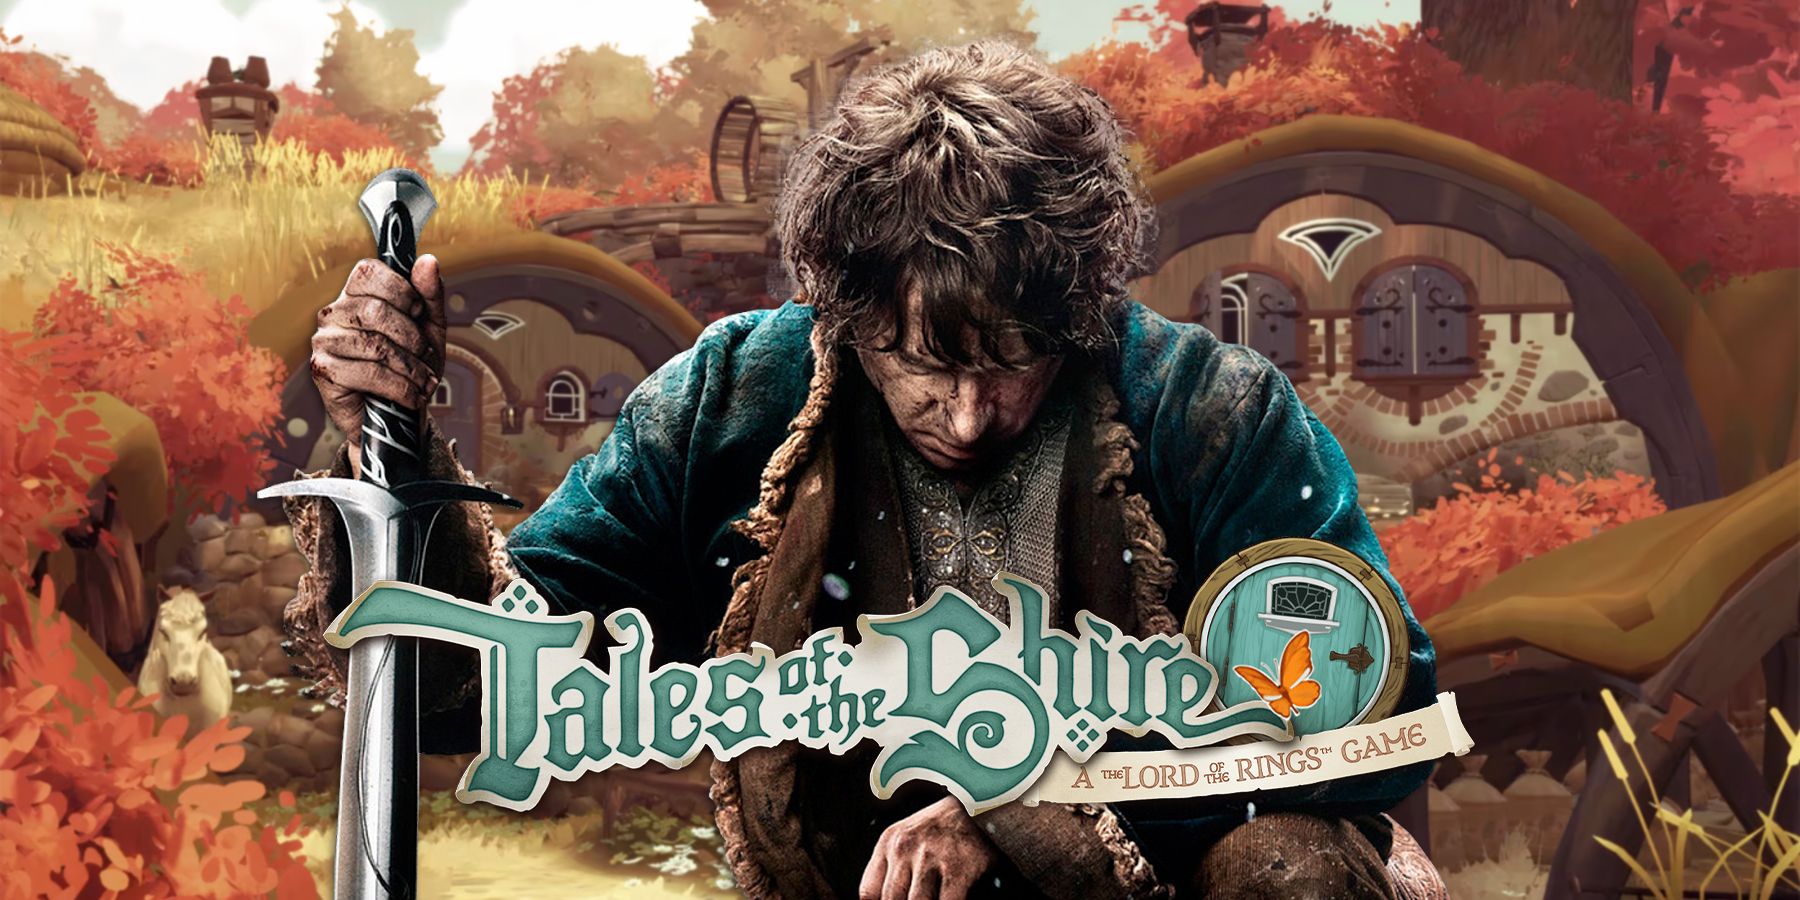 Tales of the Shire with Bilbo Baggins